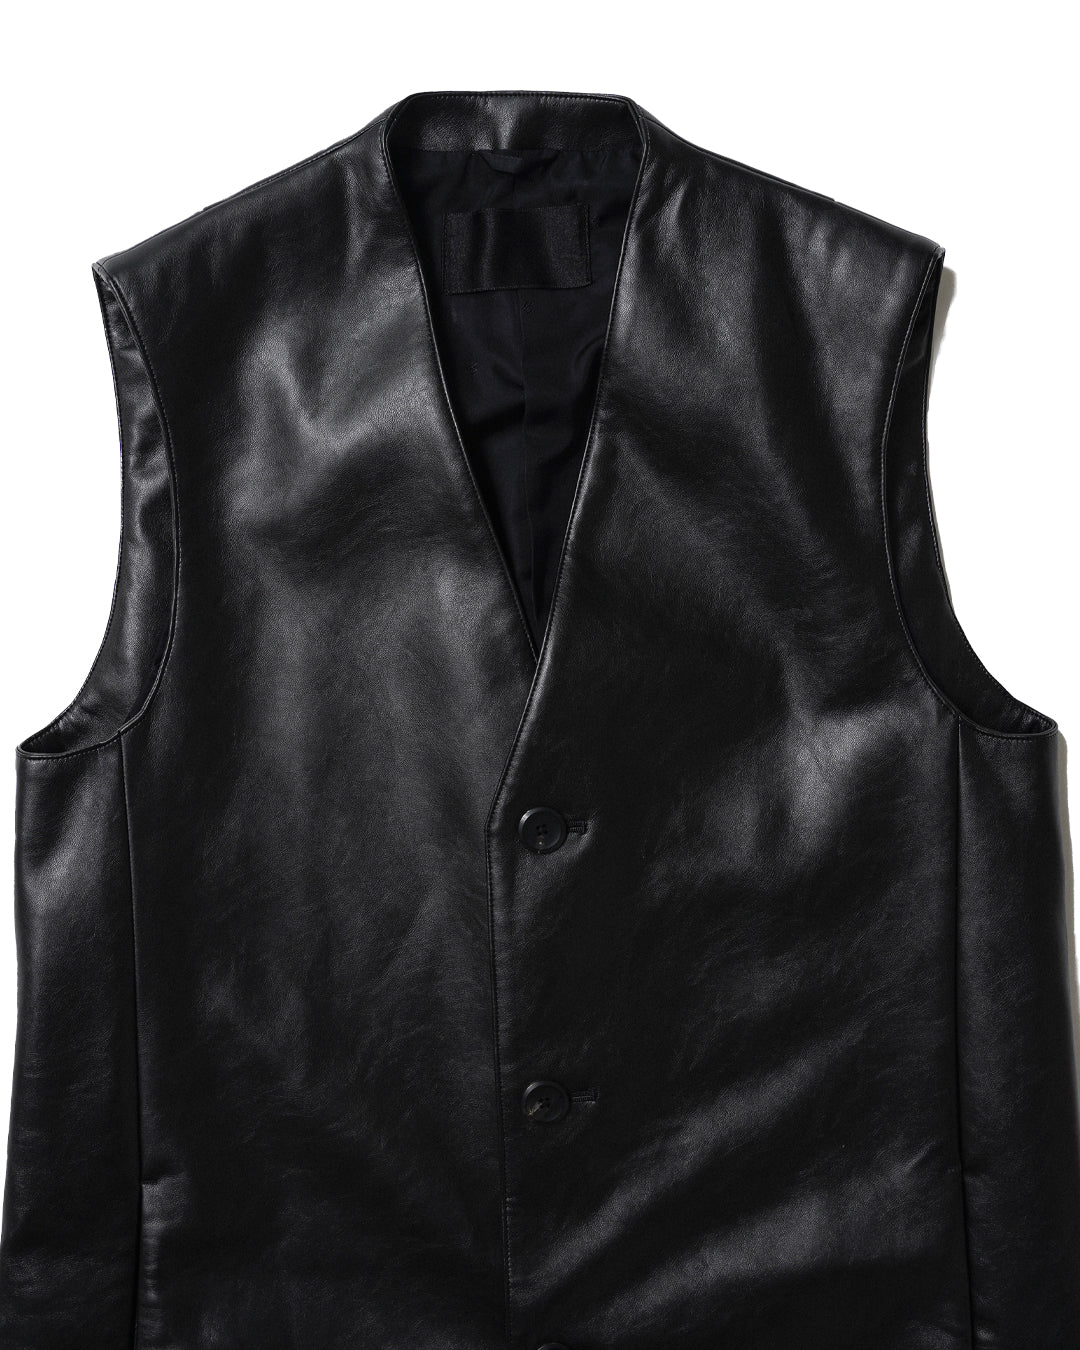 SYNTHETIC LEATHER SLEEVELESS COAT - Baby's all right